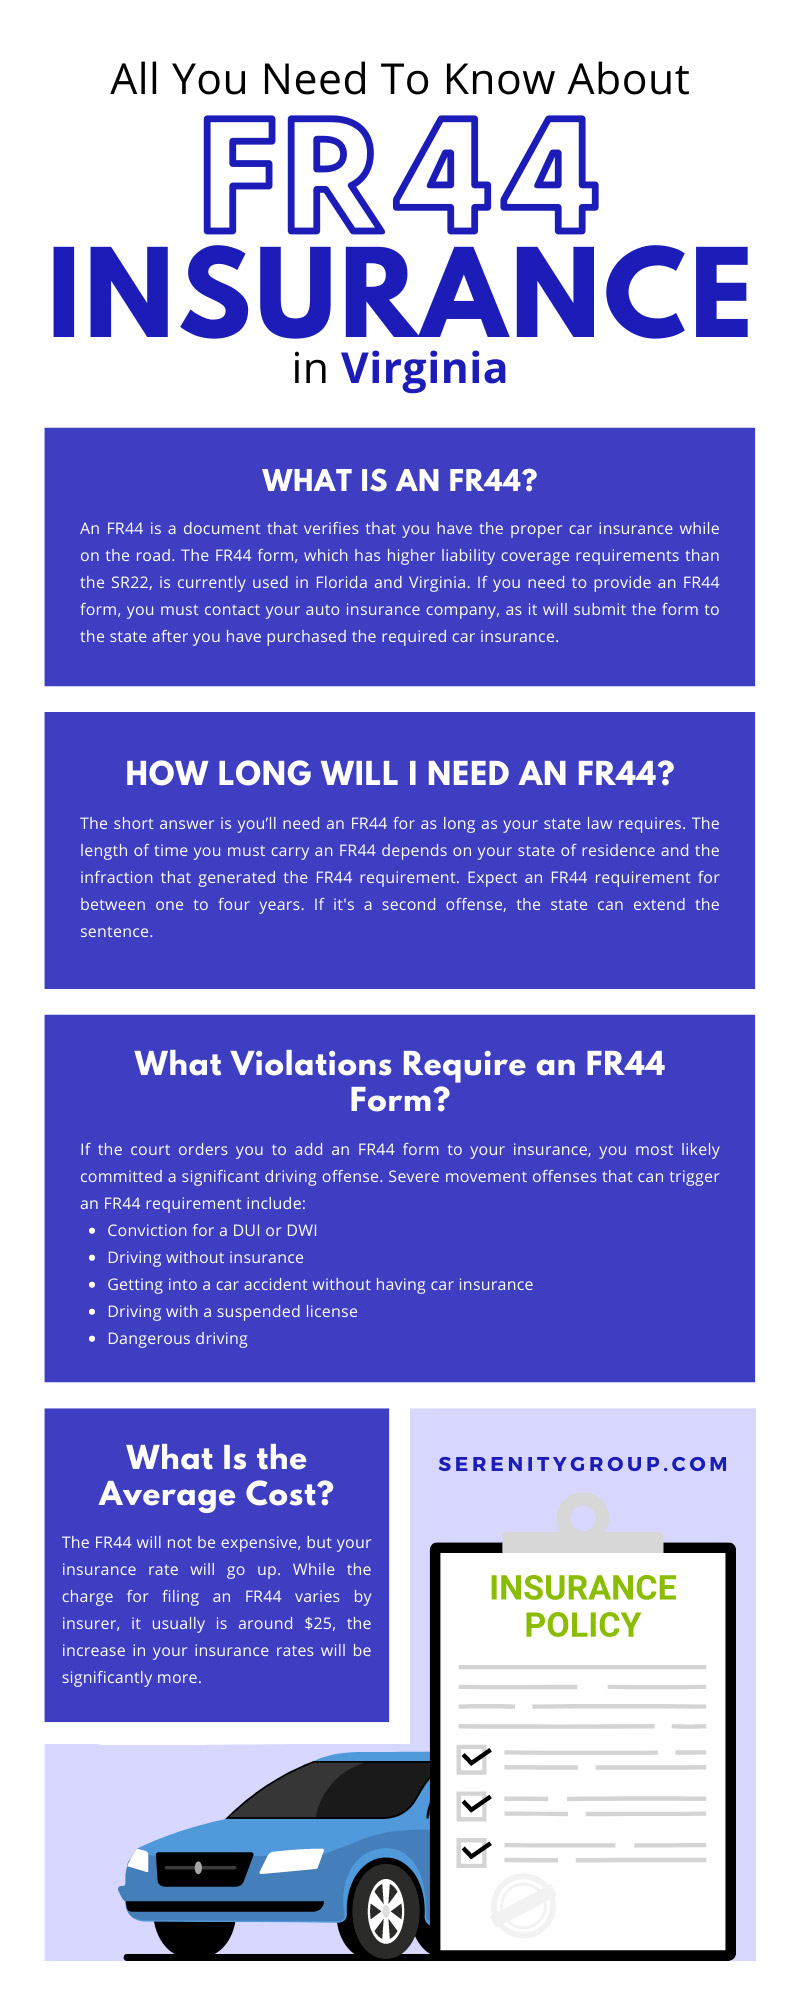 All You Need To Know About FR44 Insurance in Virginia